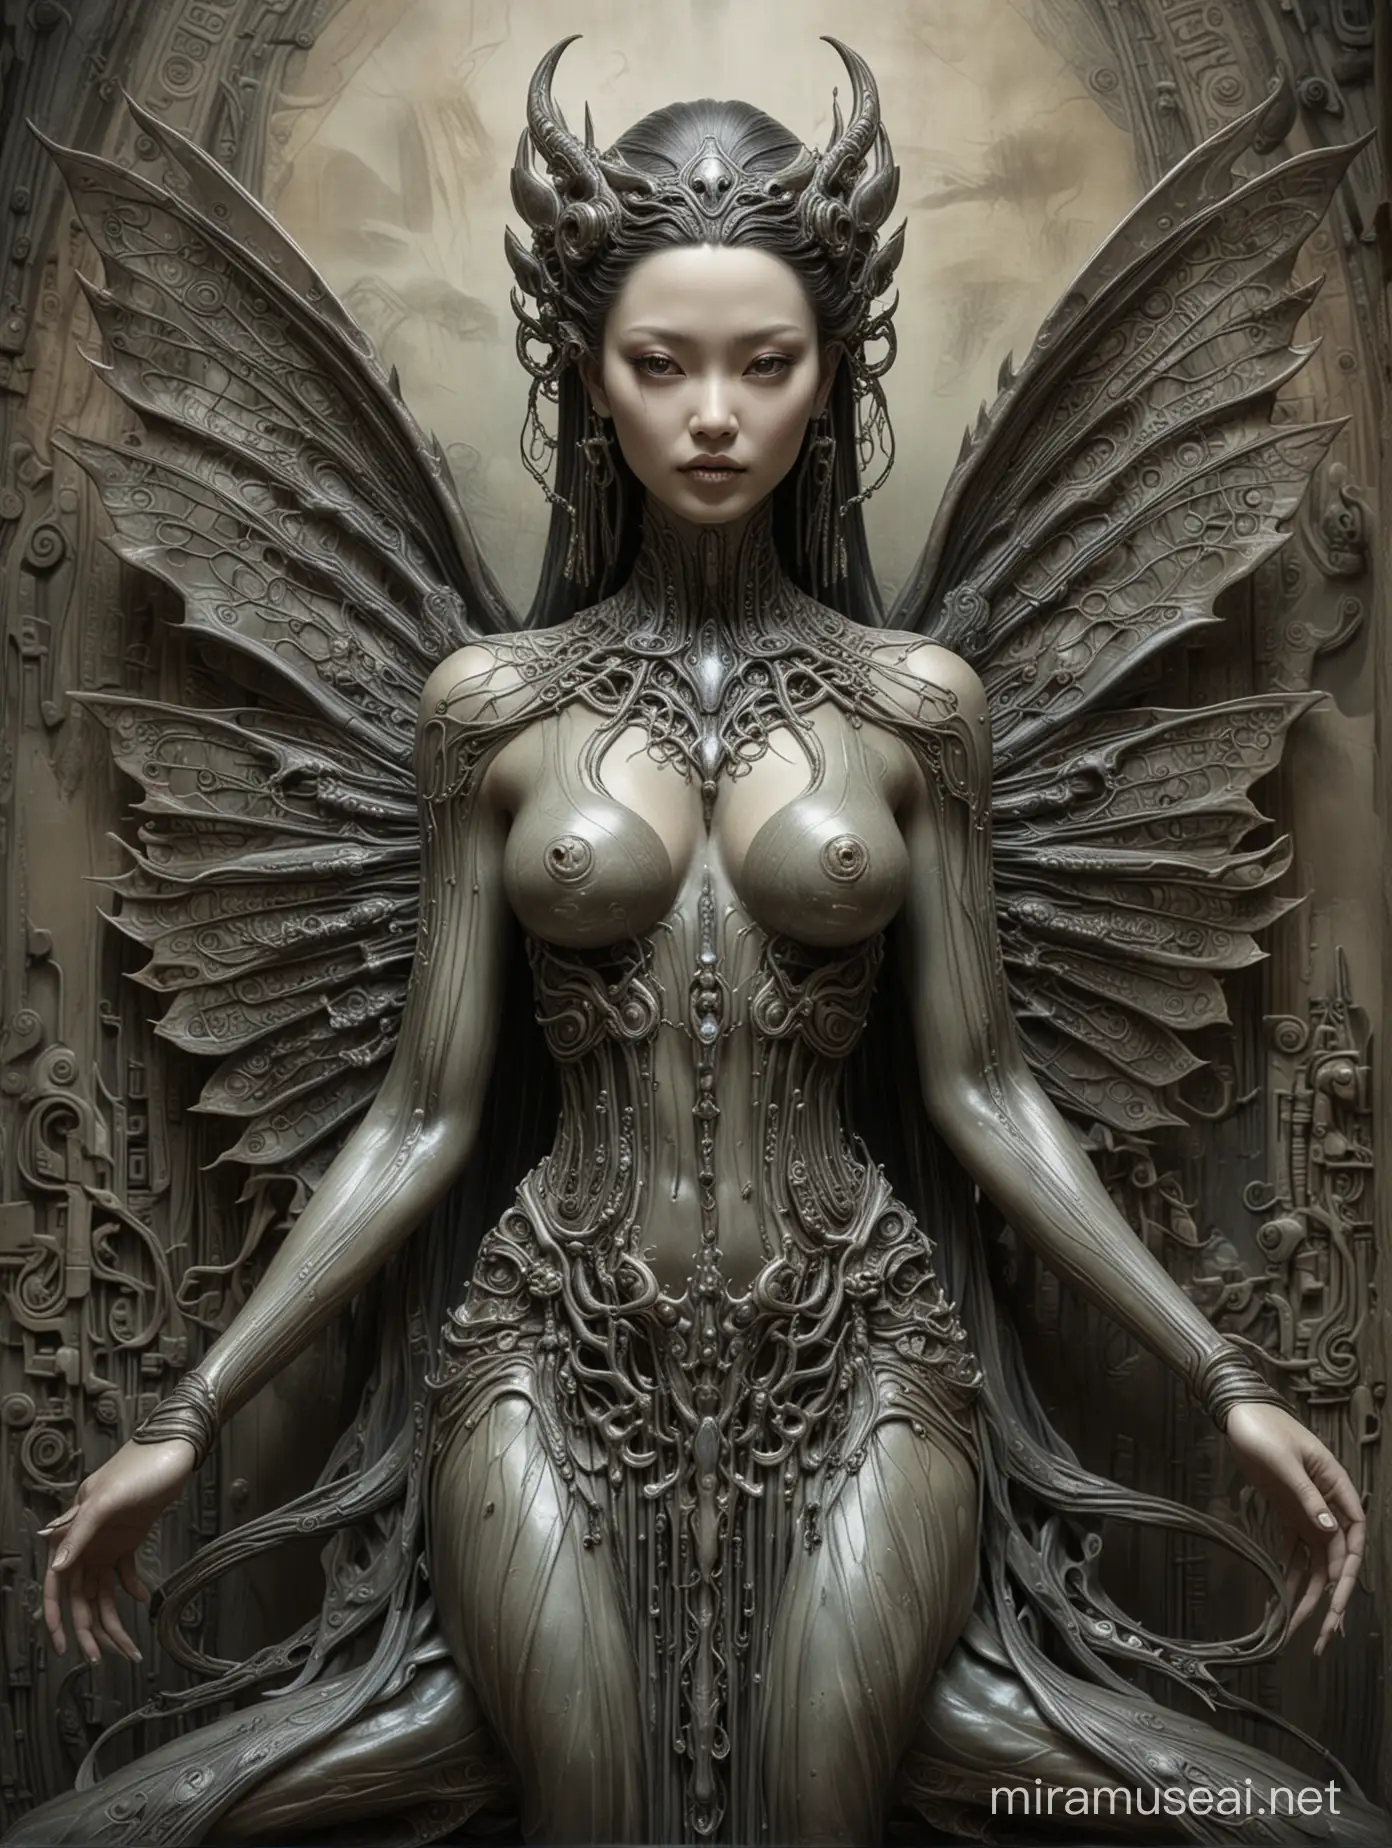 HR Giger Inspired Fairy of Dunhuang Artwork